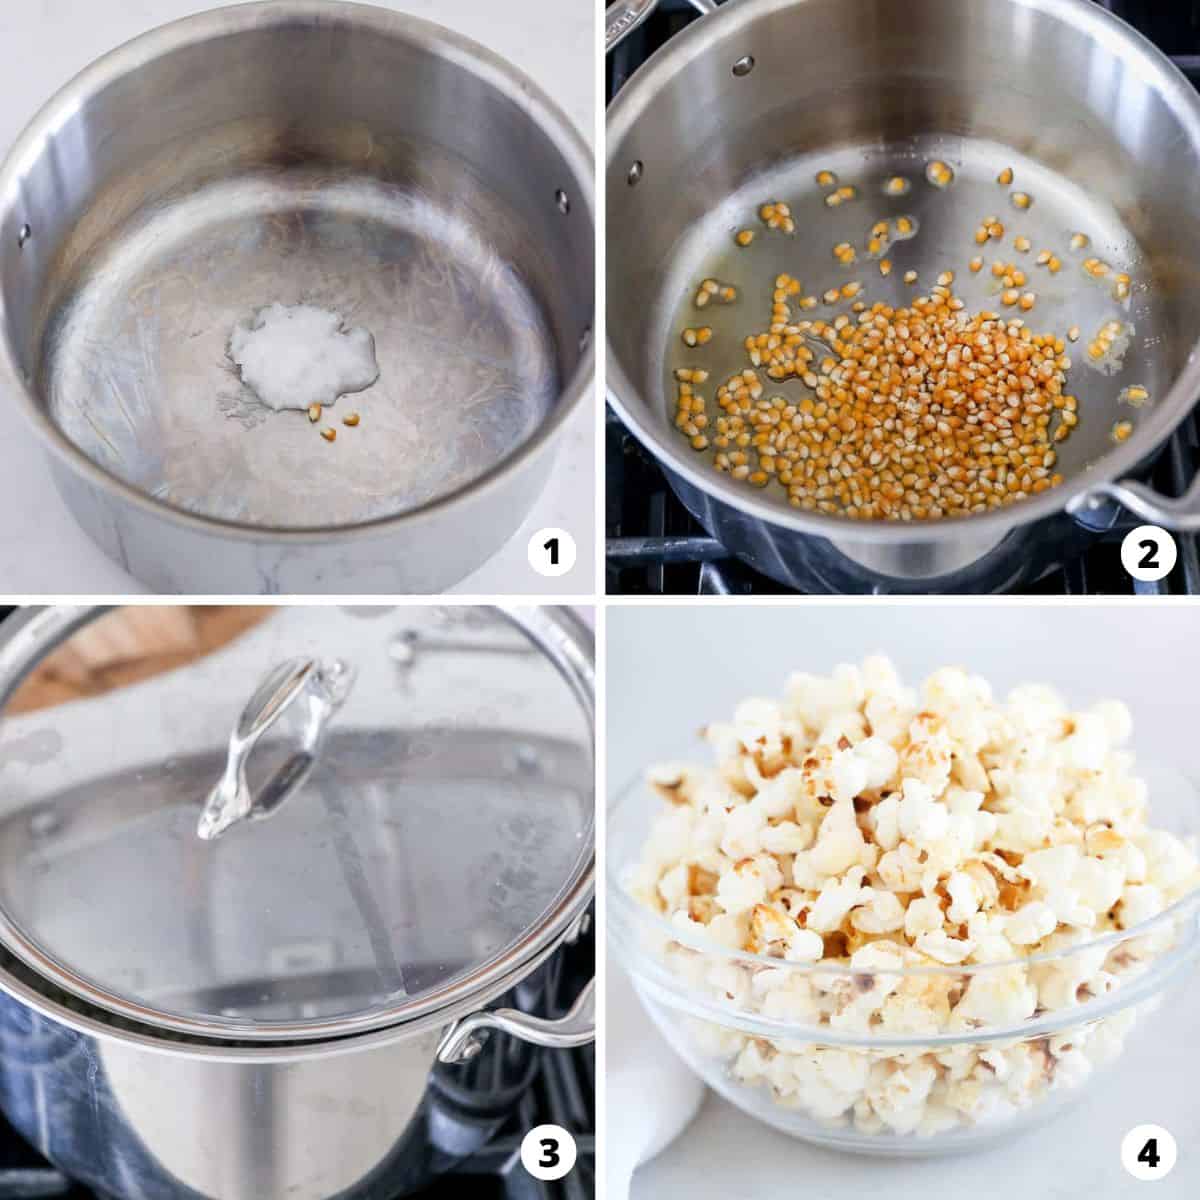 Step by step photos showing how to make kettle corn on the stove.